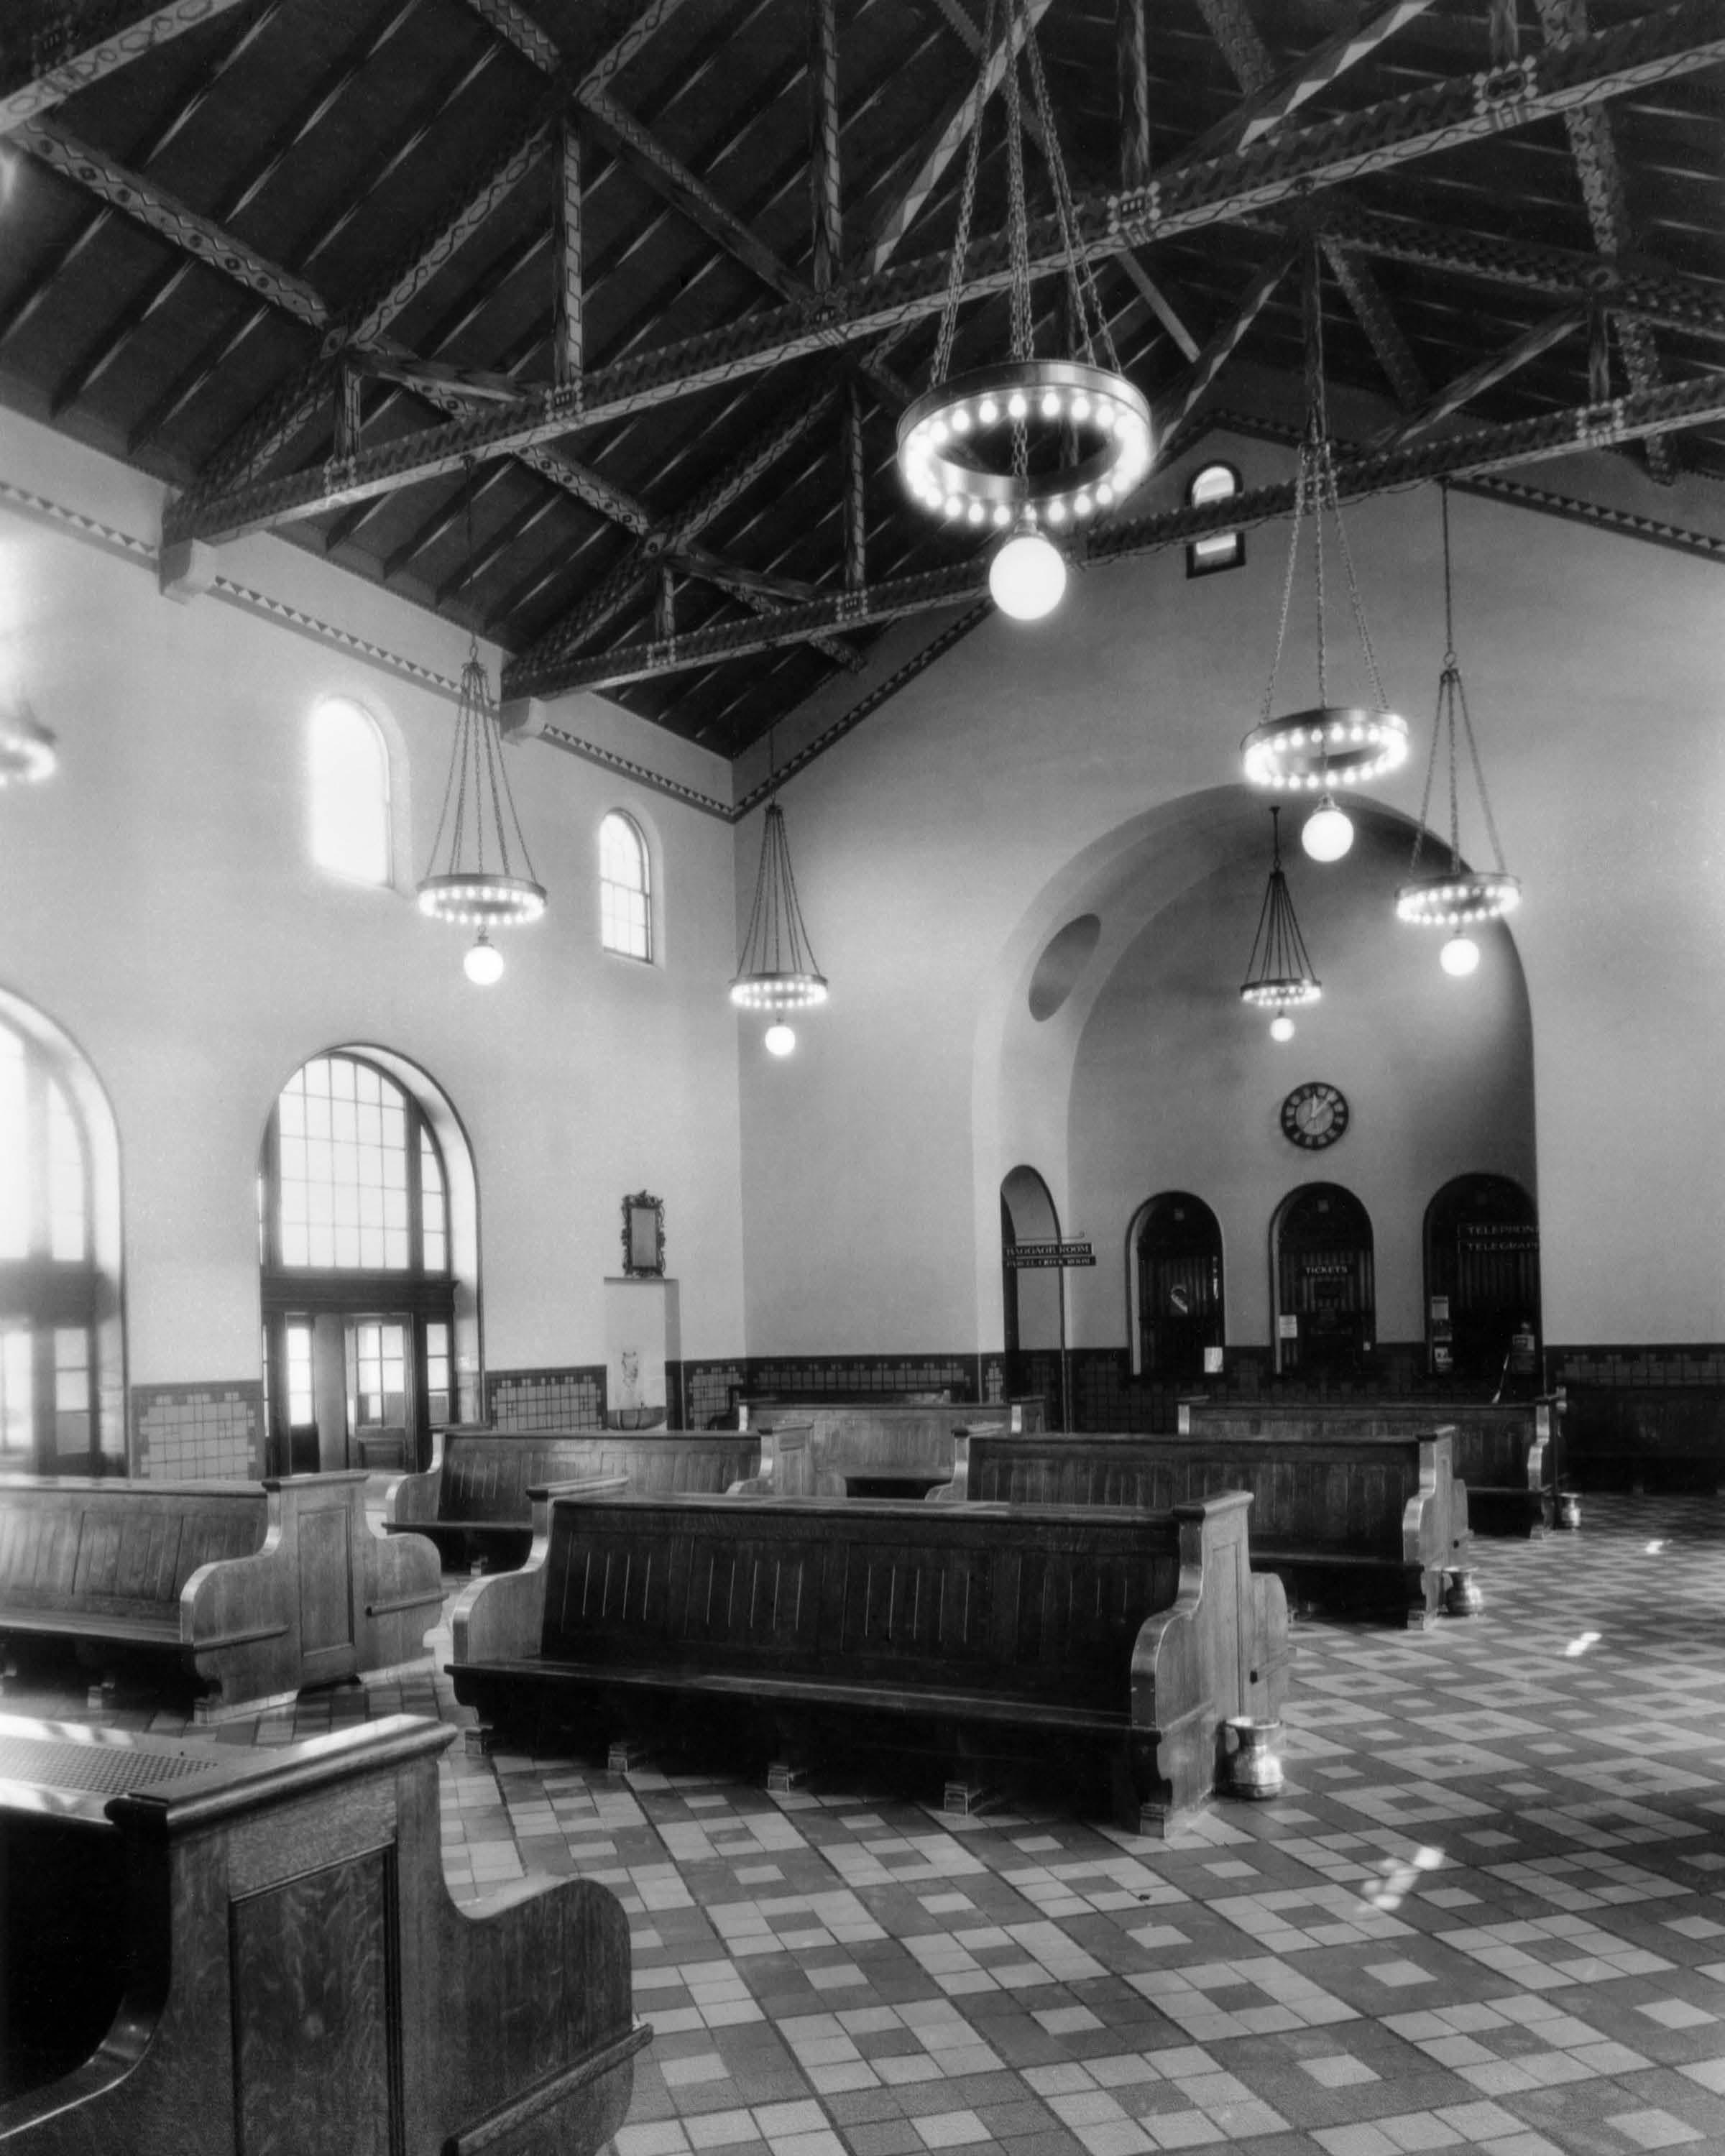 Boise Depot 3rd Sunday Of Each Month Free Guided Historic Depot Tour @ Noon & 1:30p